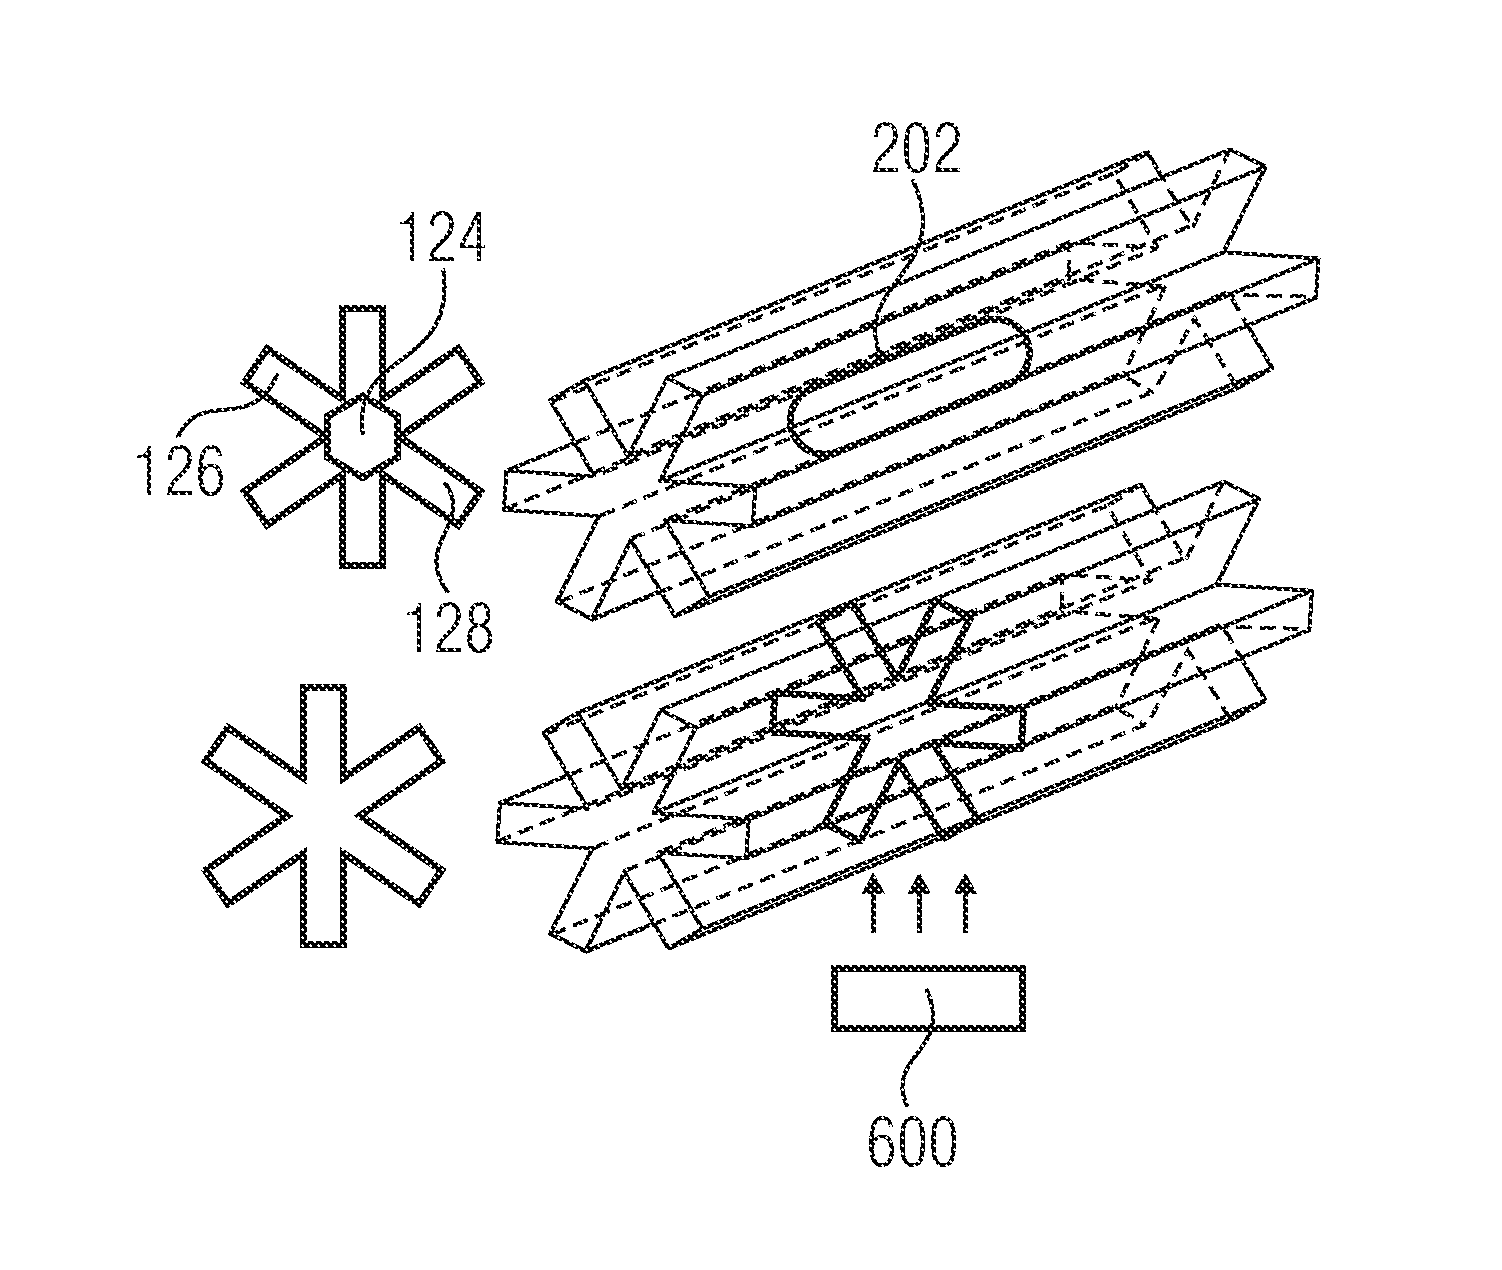 Device and method for generating a drop of a liquid